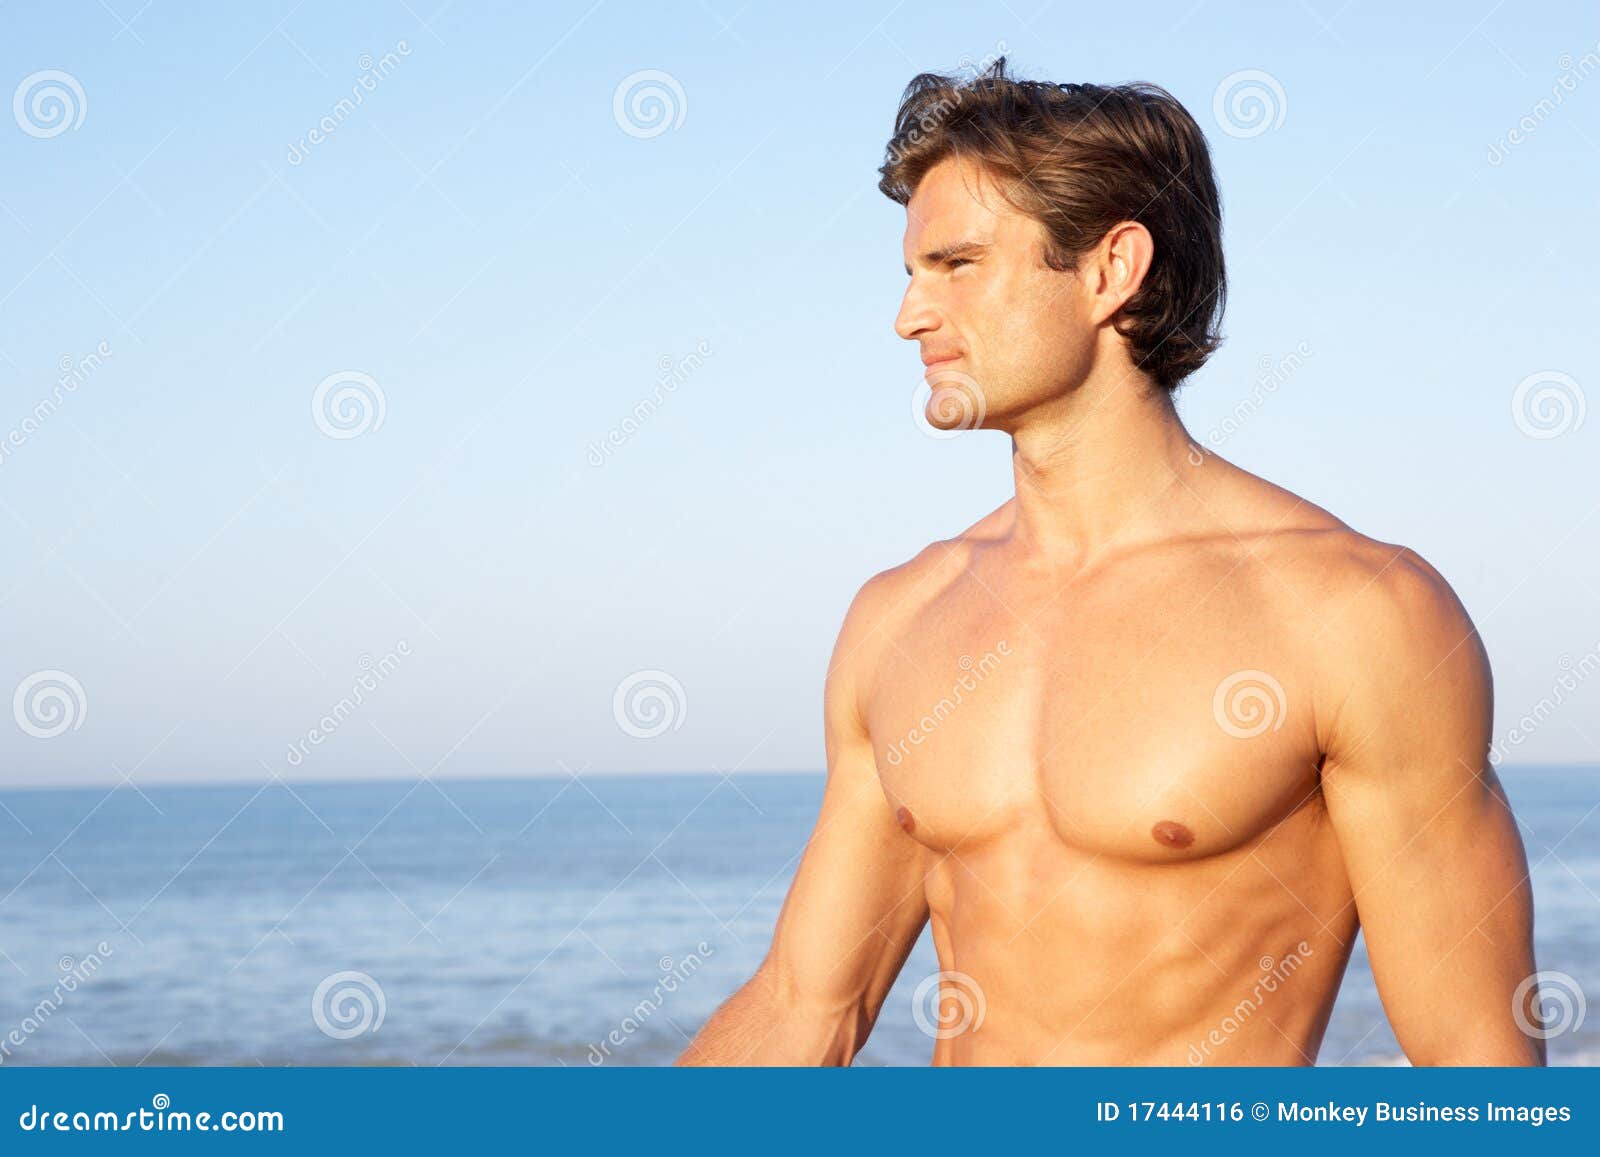 Attractive Man Of Model Appearance Posing On Tropical Beach Stock Photo,  Picture and Royalty Free Image. Image 153187081.